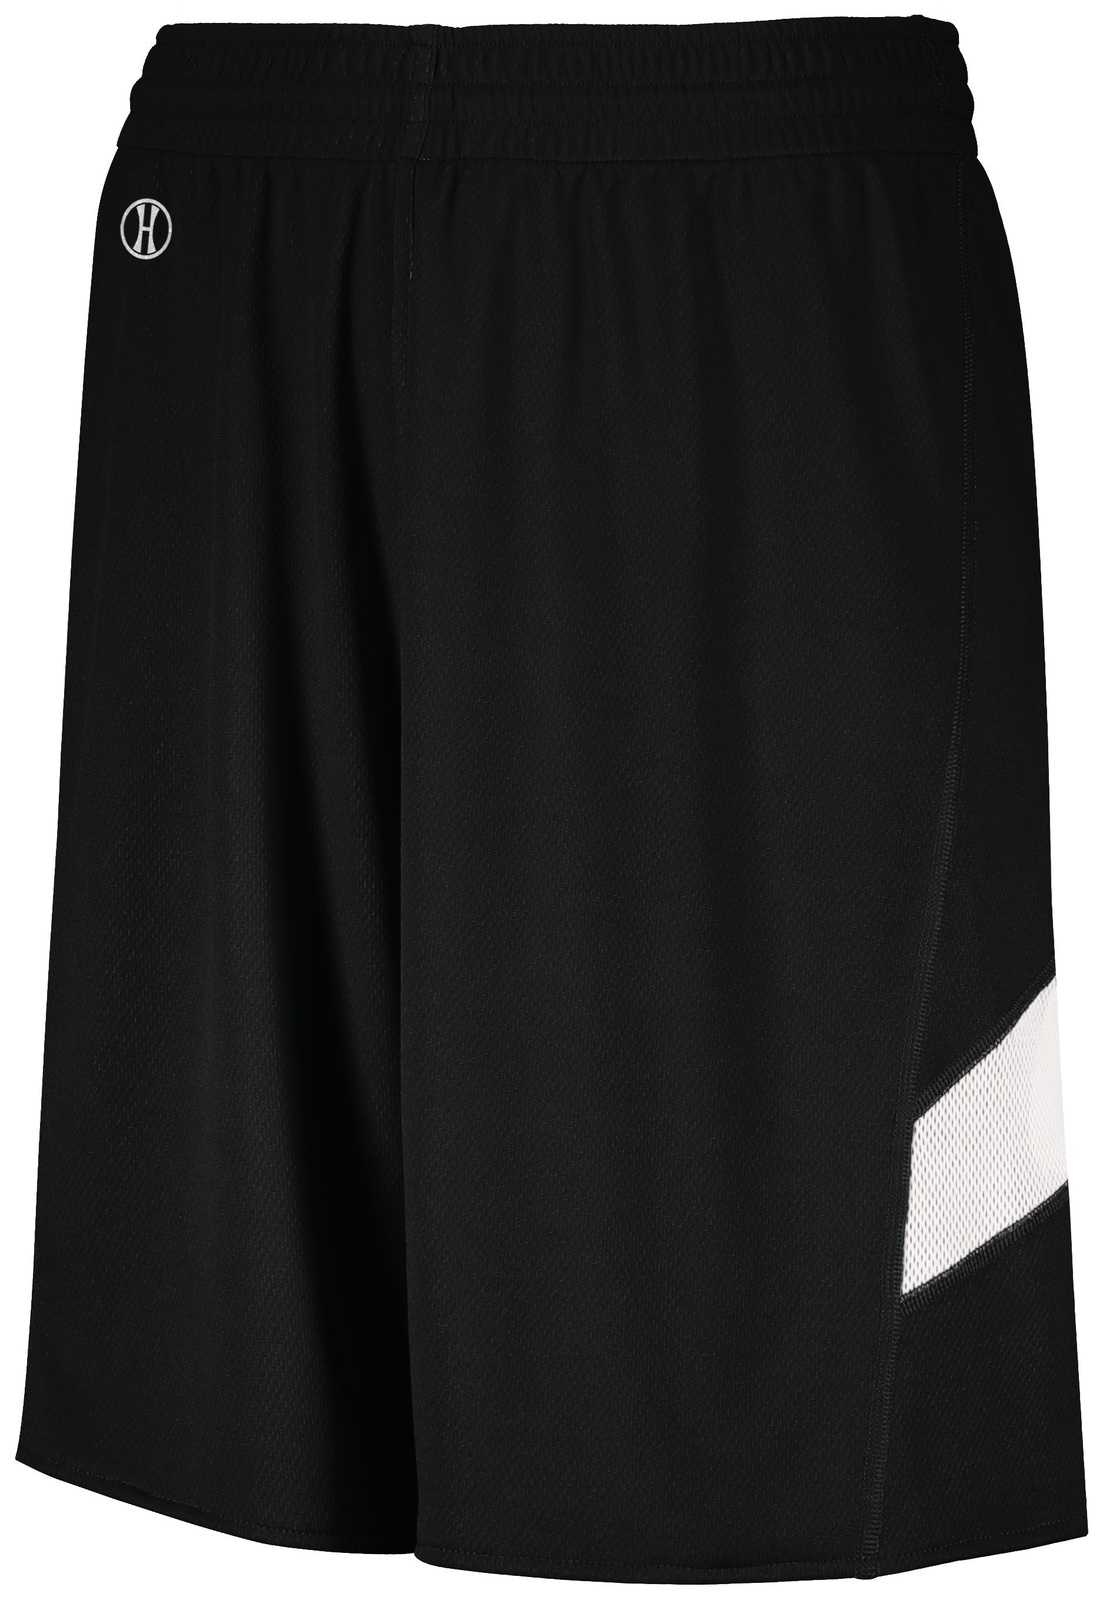 Holloway 224279 Youth Dual-Side Single Ply Basketball Shorts - Black White - HIT a Double